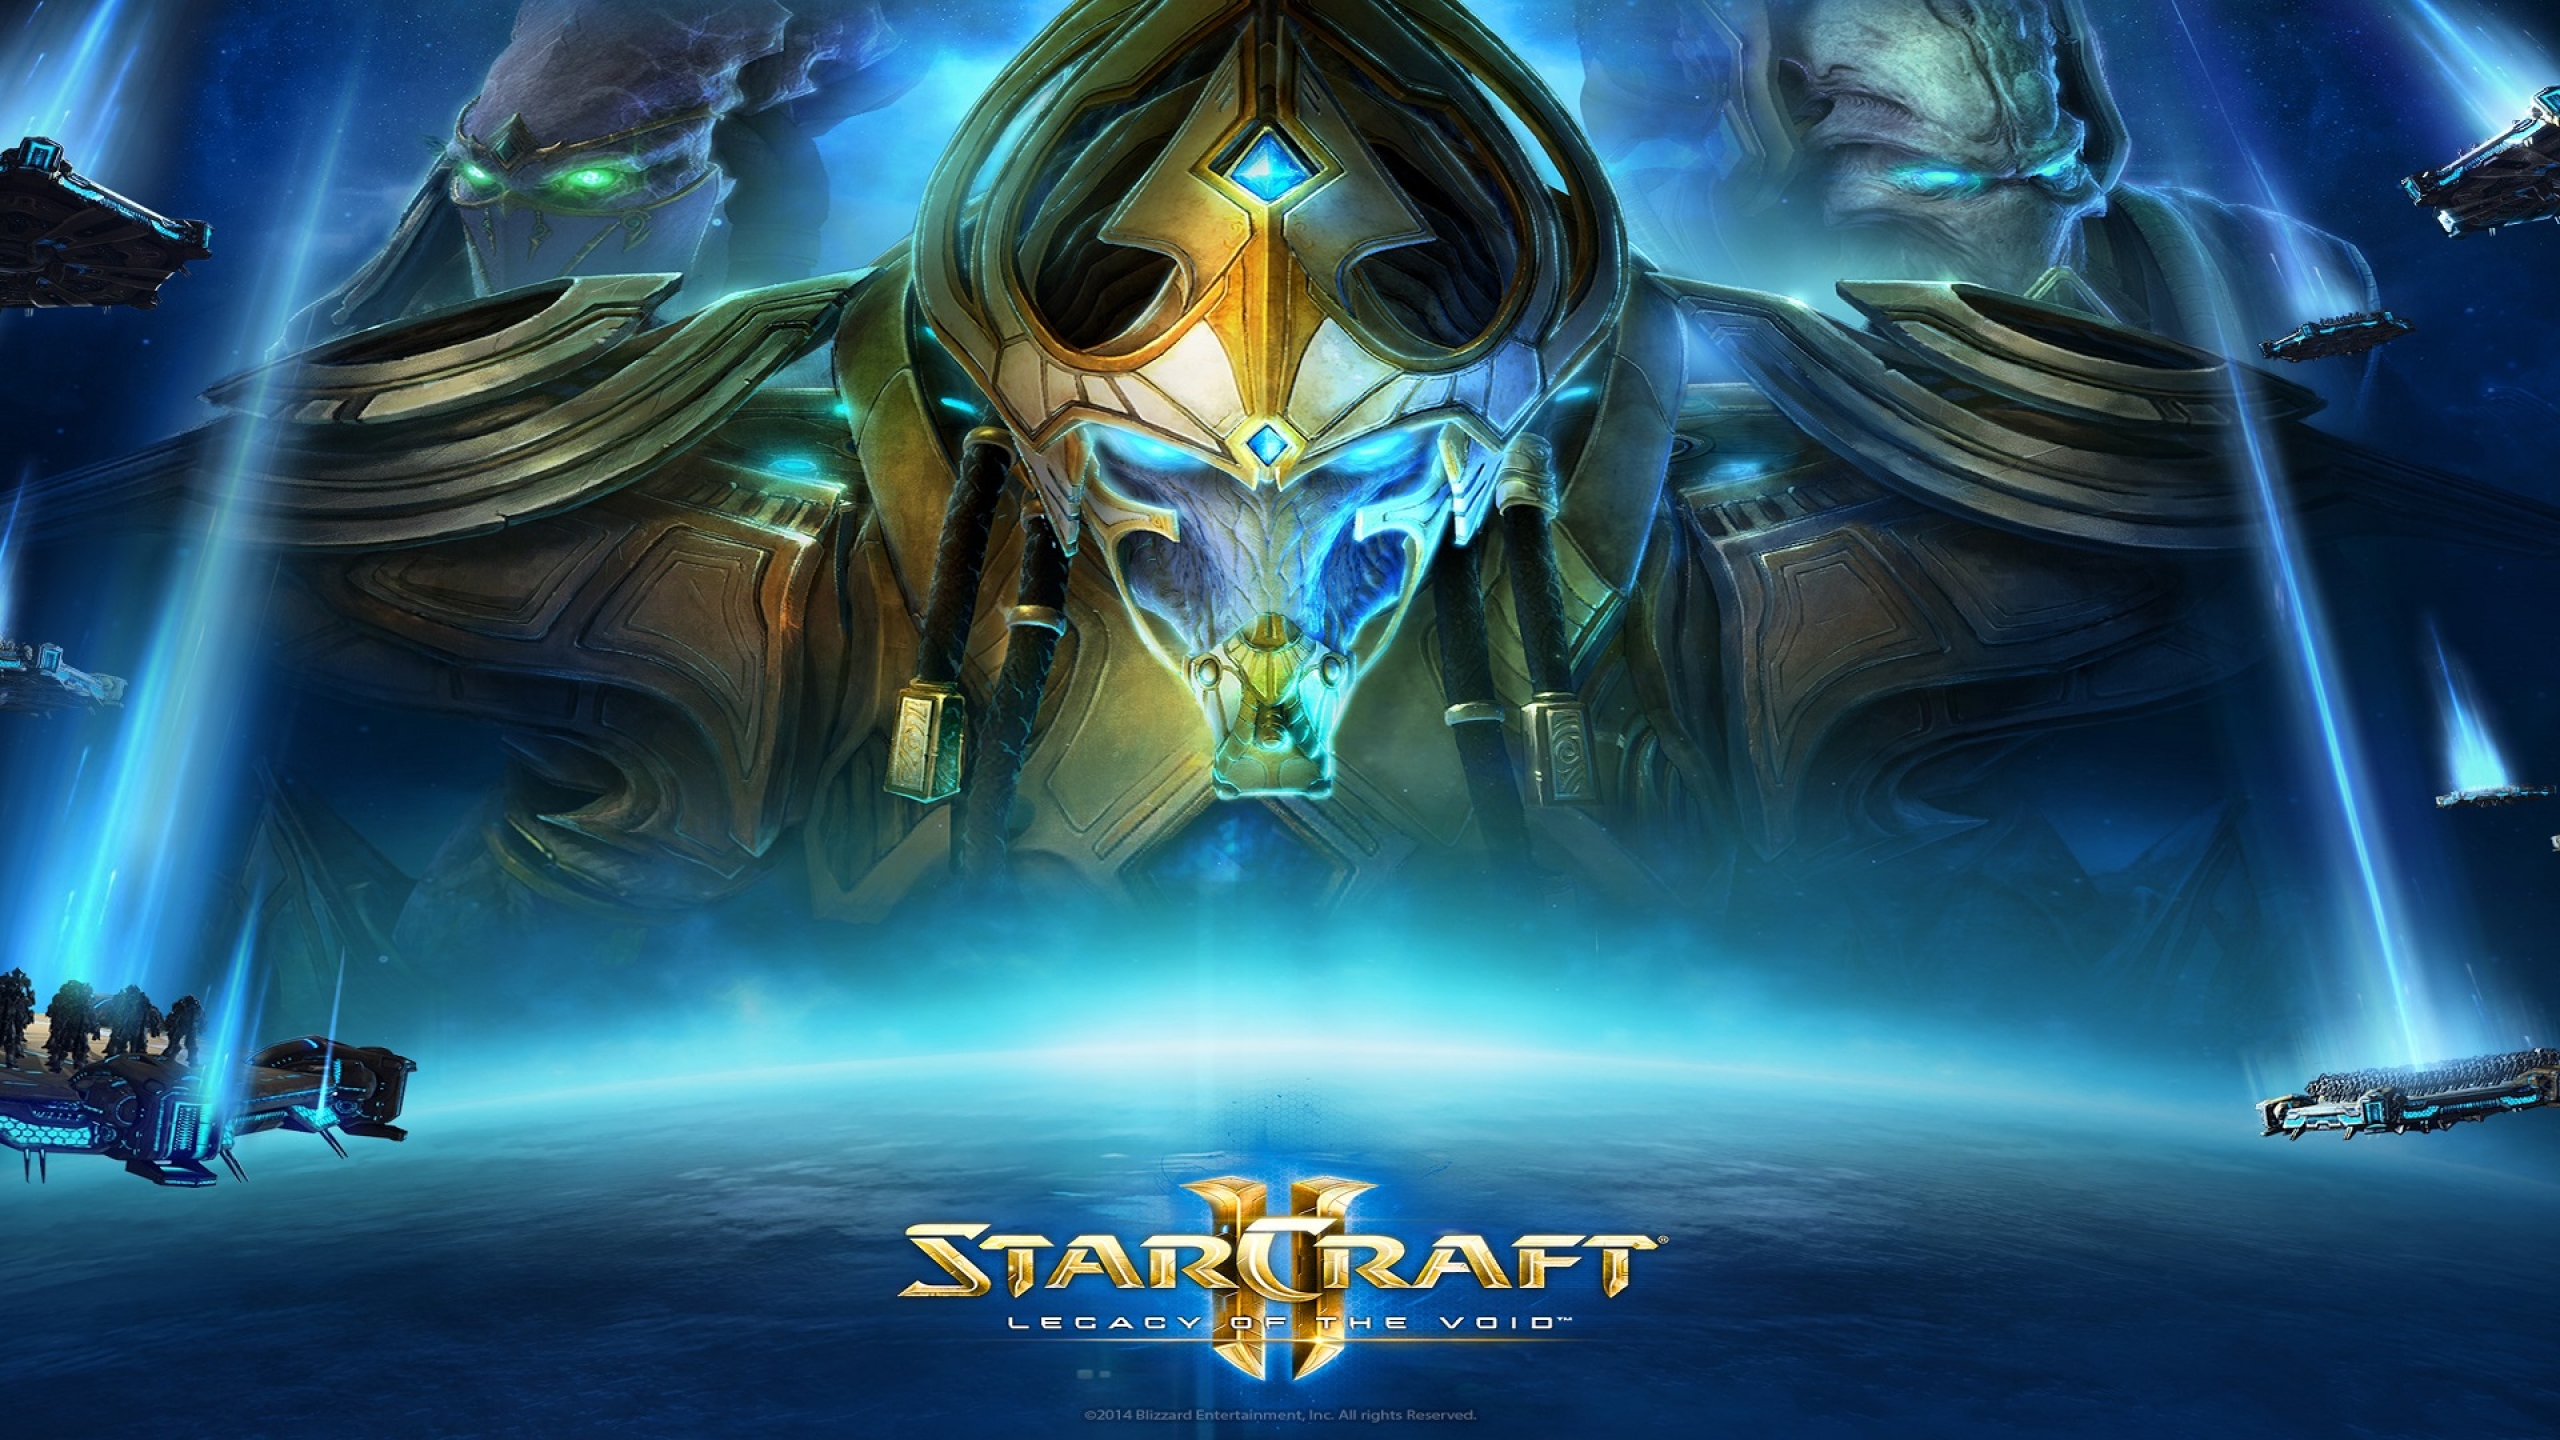 X Starcraft Ii Legacy Of The Void Starcraft P Resolution Wallpaper Hd Games